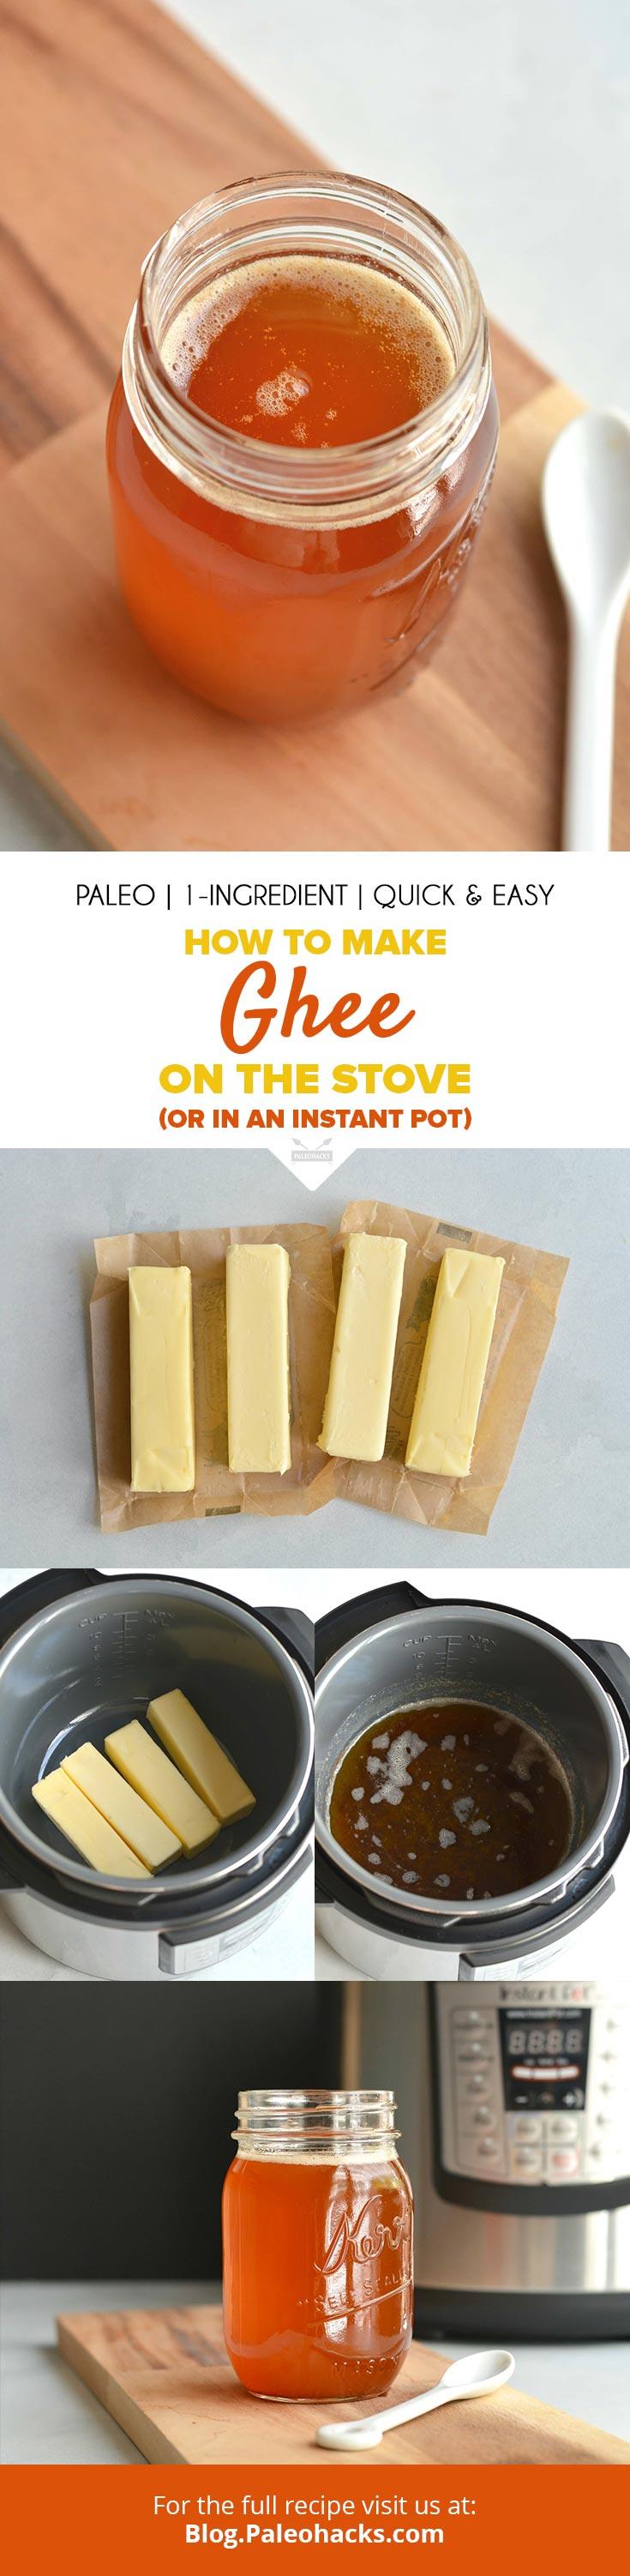 Need an alternative to butter? Check out two quick and easy ways to make homemade ghee instead, using your Instant Pot or stovetop.